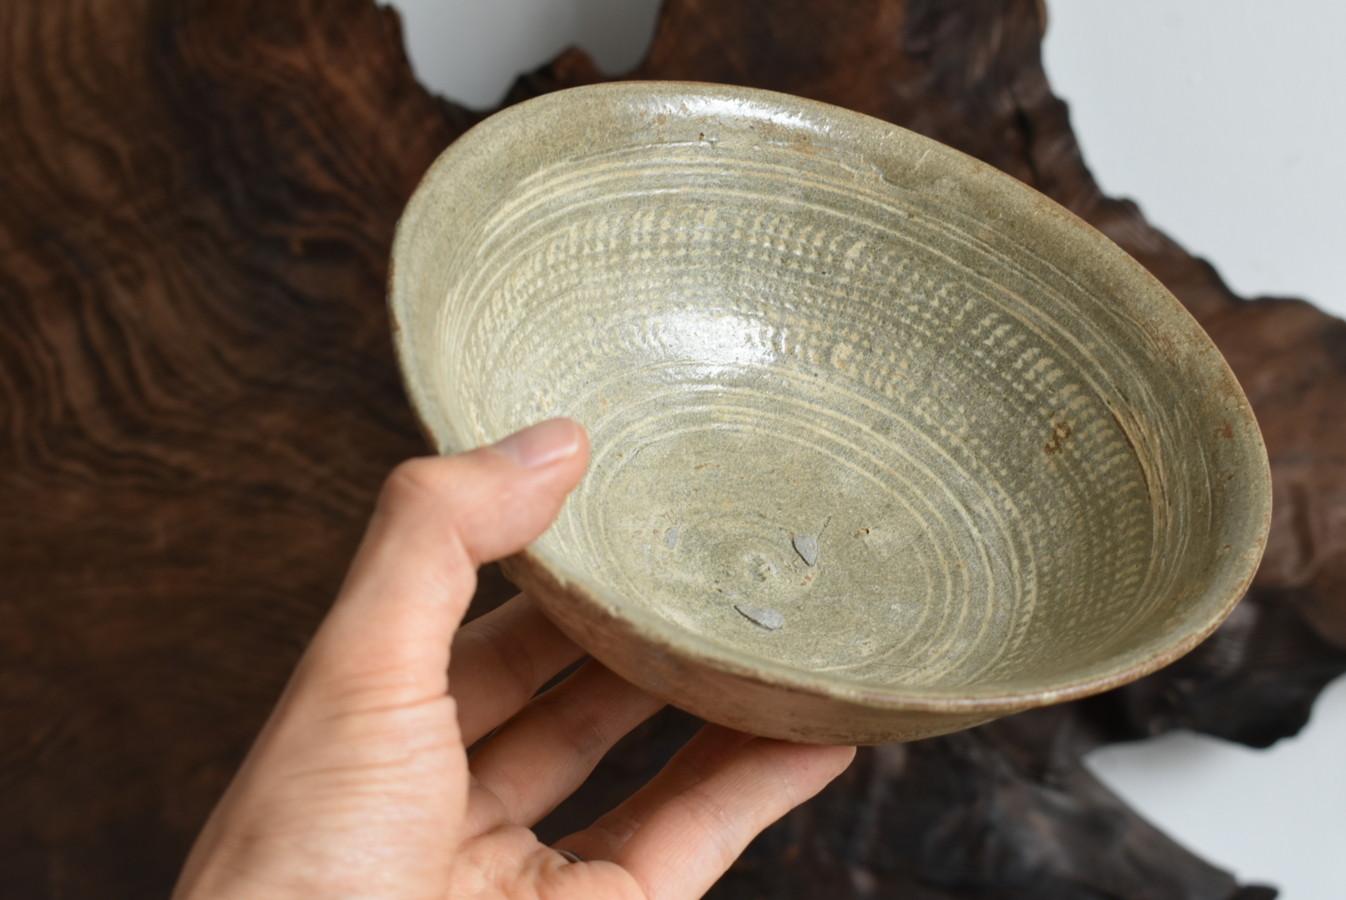 This is a Korean vessel made in the 15th and 16th centuries.
A unique pattern is drawn in the vessel.
This is done by stamping or carving grooves on the pottery and filling it with white clay to create a pattern. This is the so-called inlay